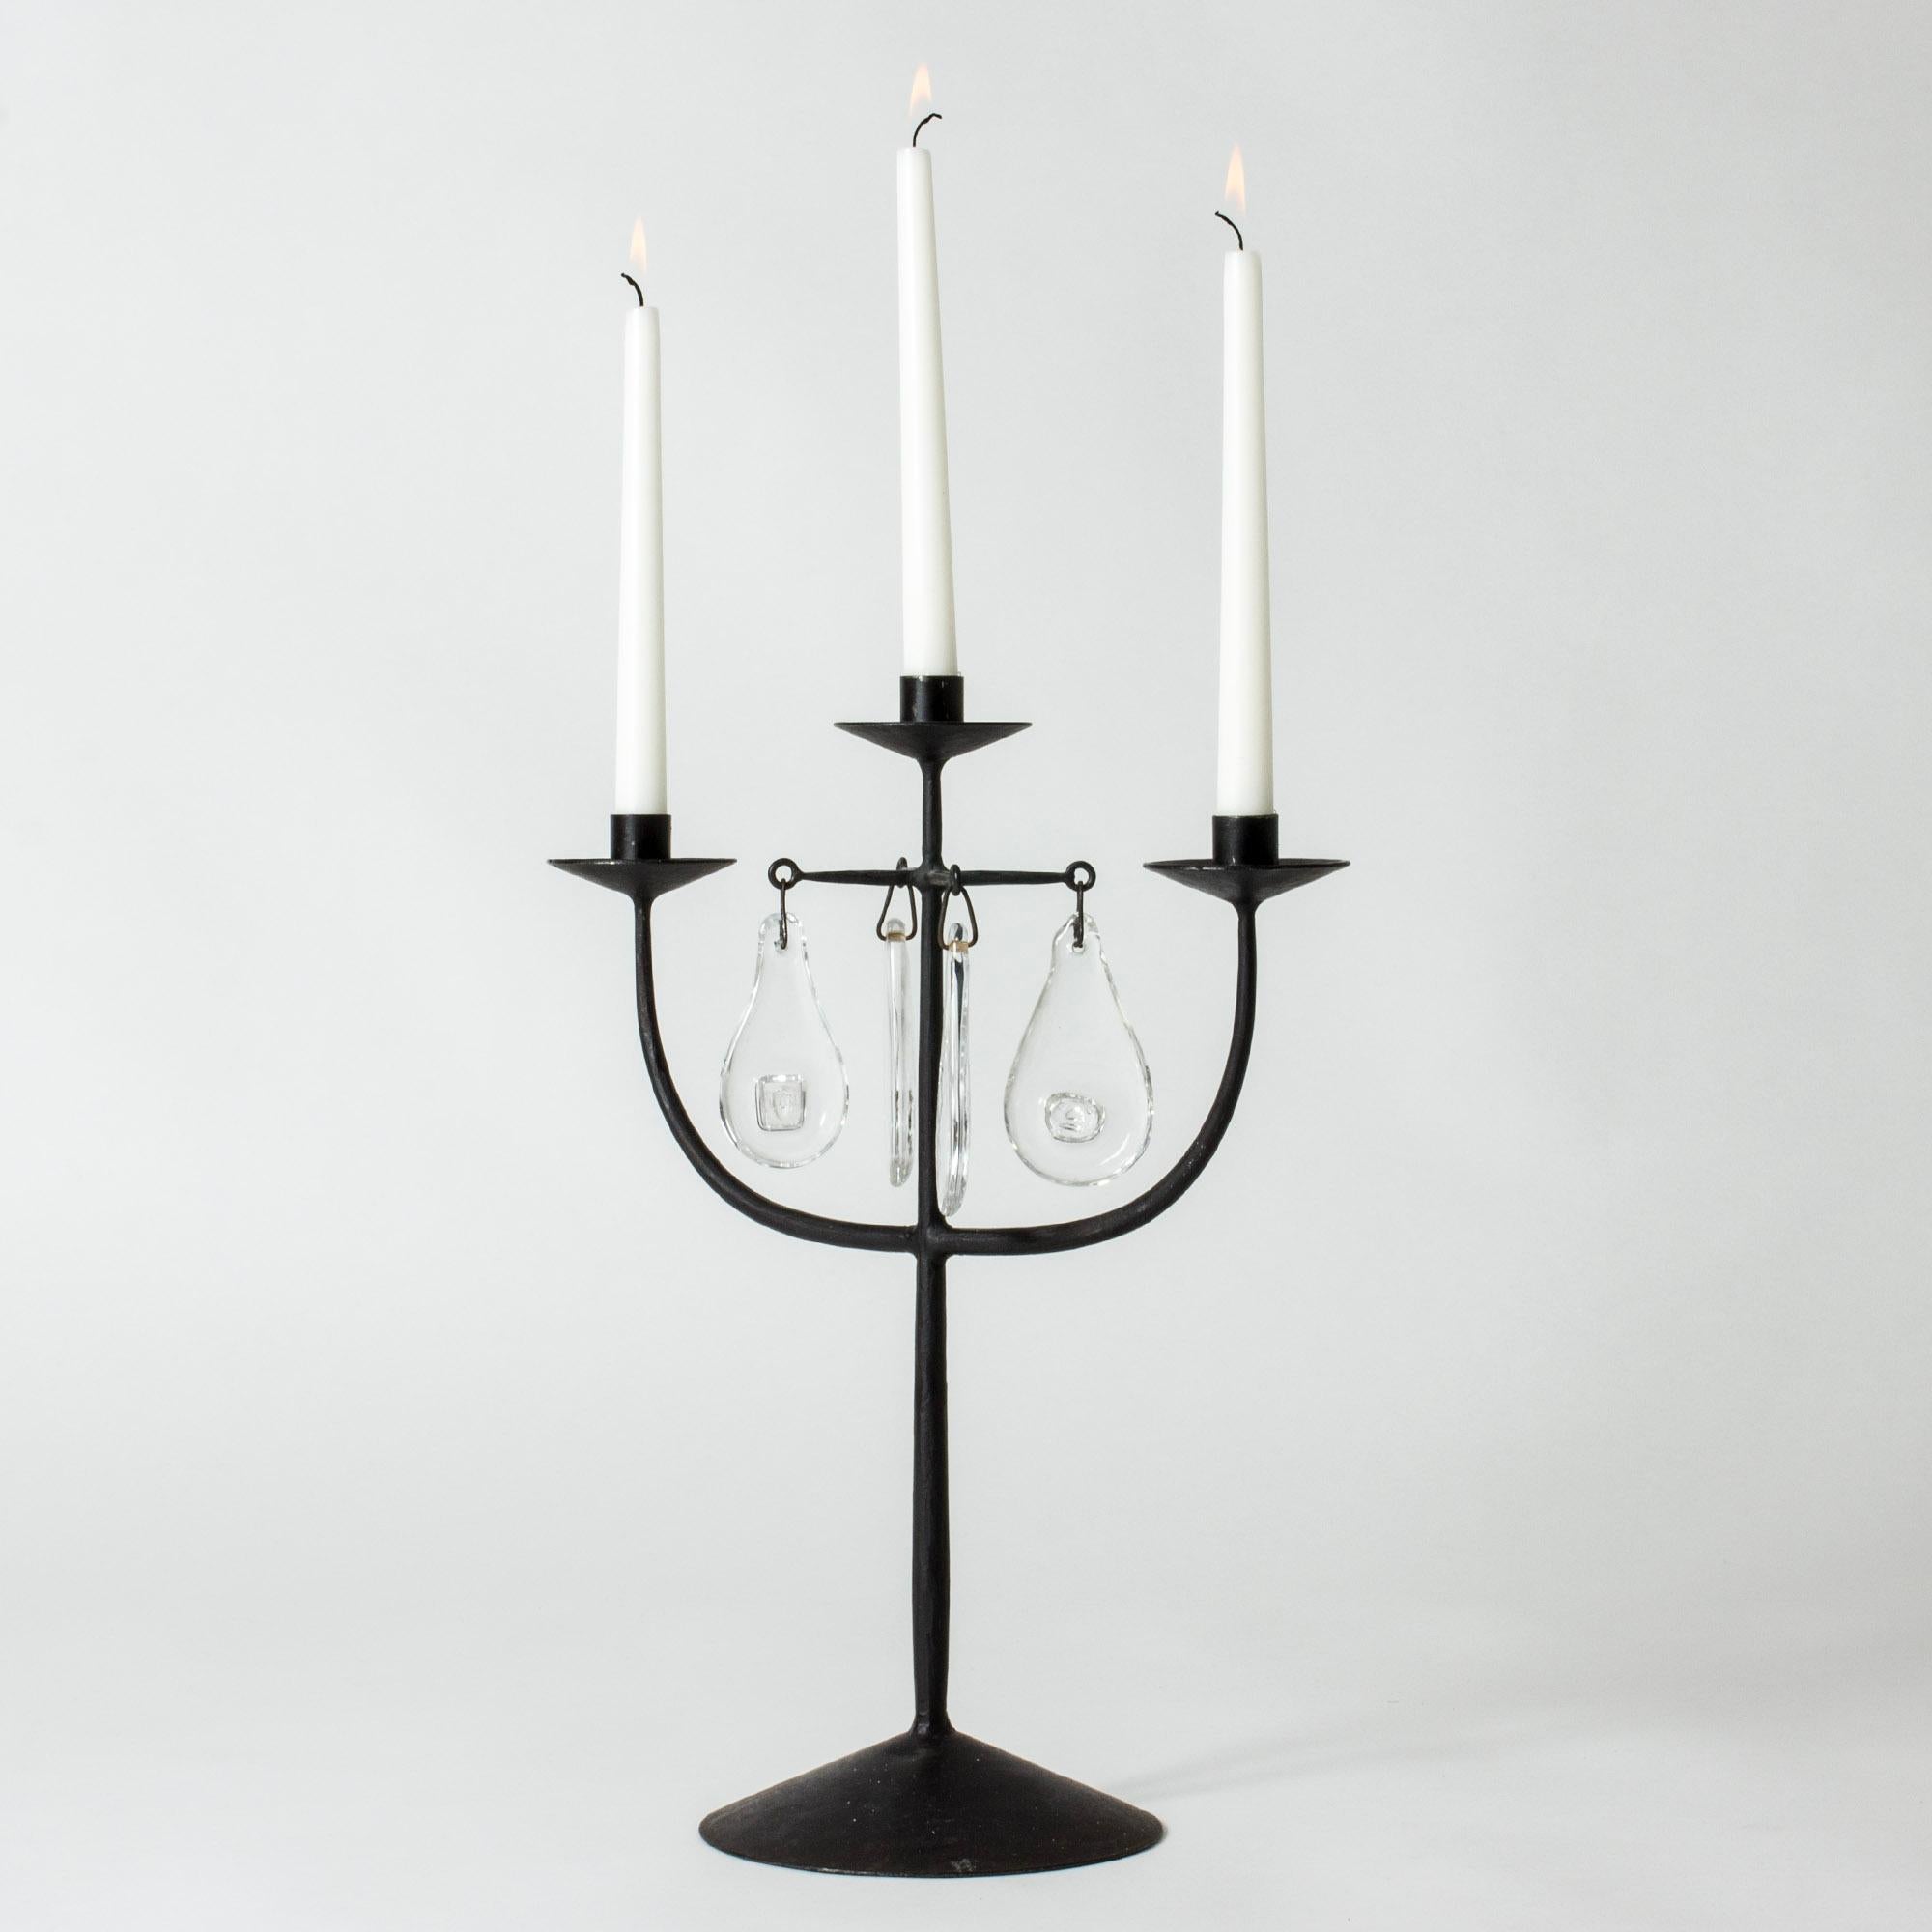 Mid-20th Century Midcentury Iron and Glass Candelabra by Erik Höglund, Boda Smide, Sweden, 1960s For Sale